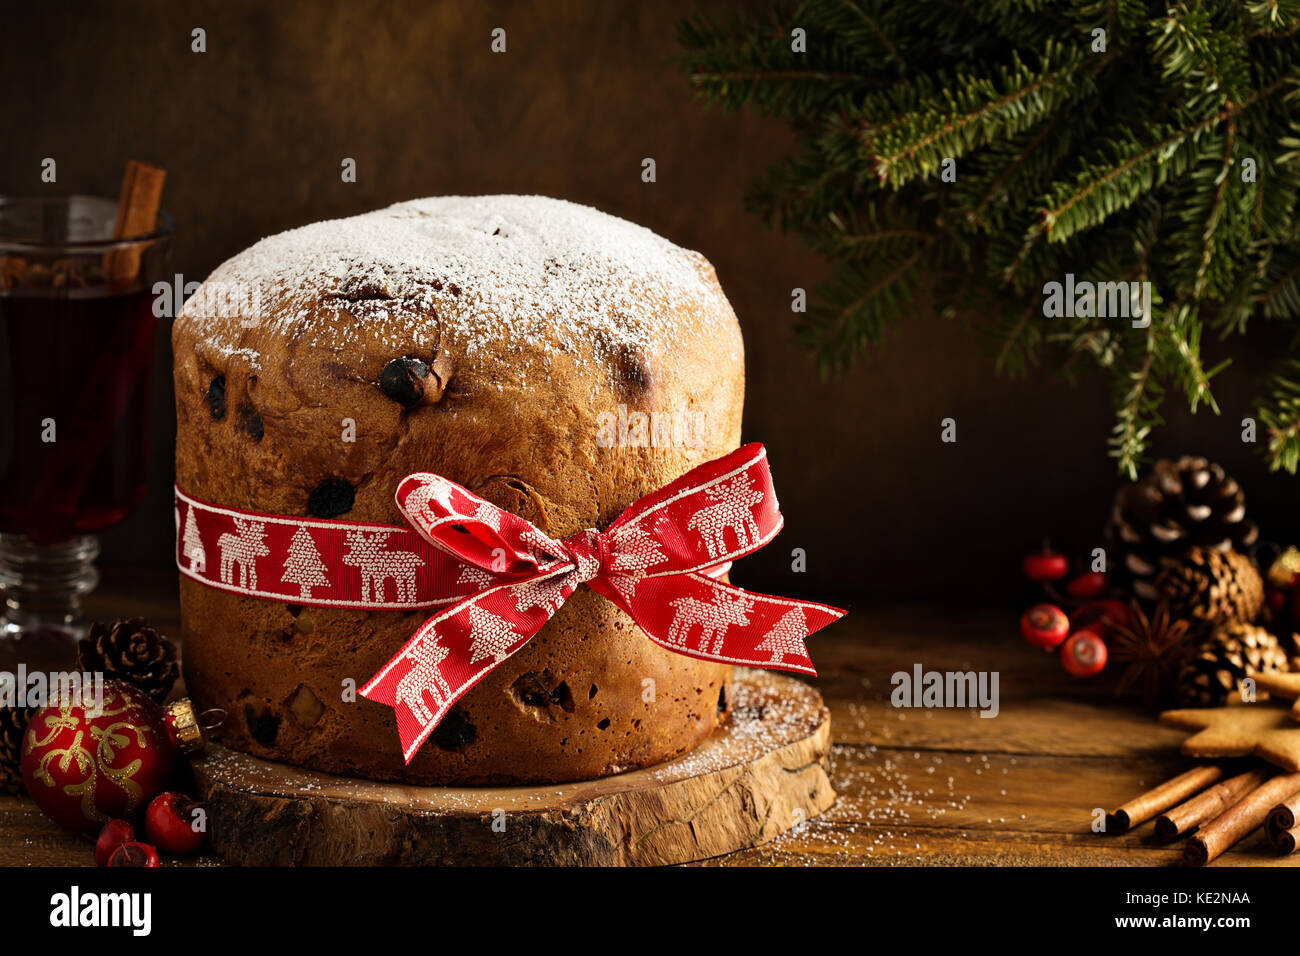 Traditional Christmas panettone with raisins and dried fruits Stock Photo